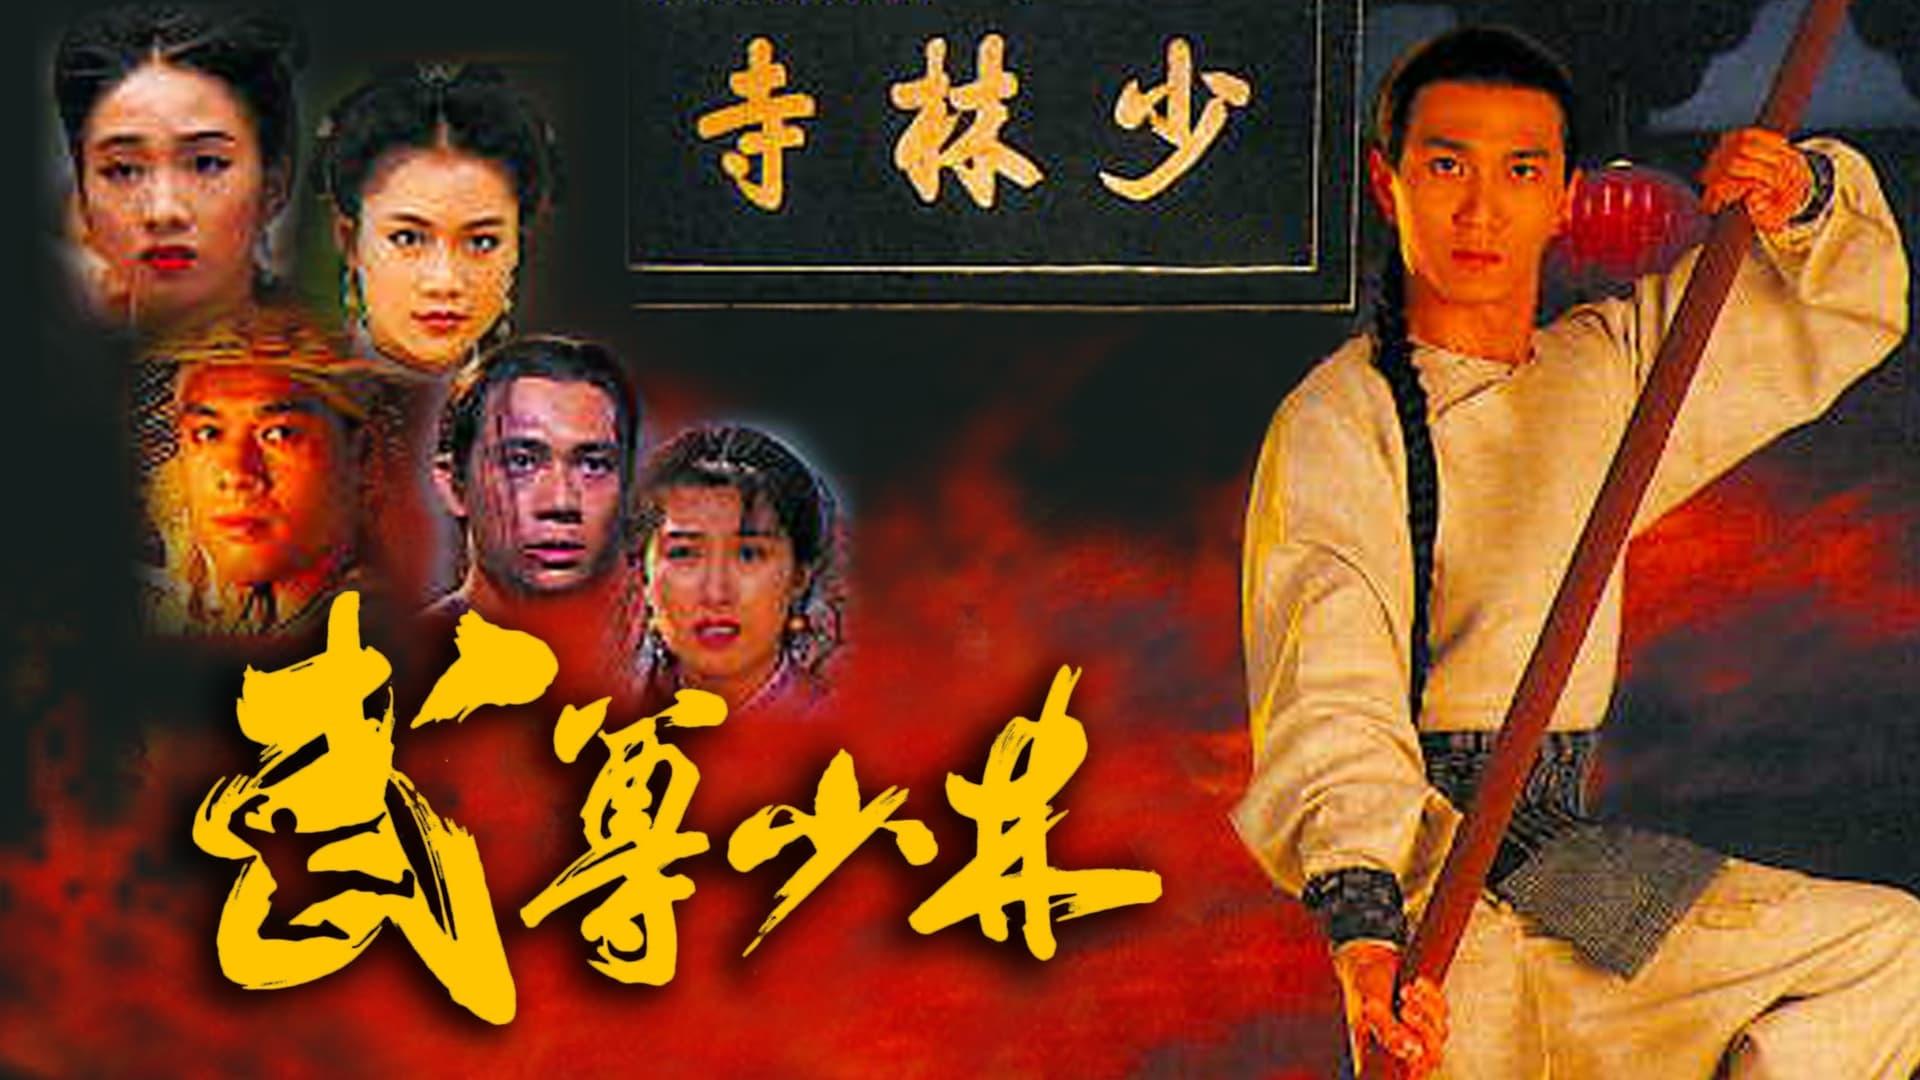 The Heroes From Shaolin backdrop